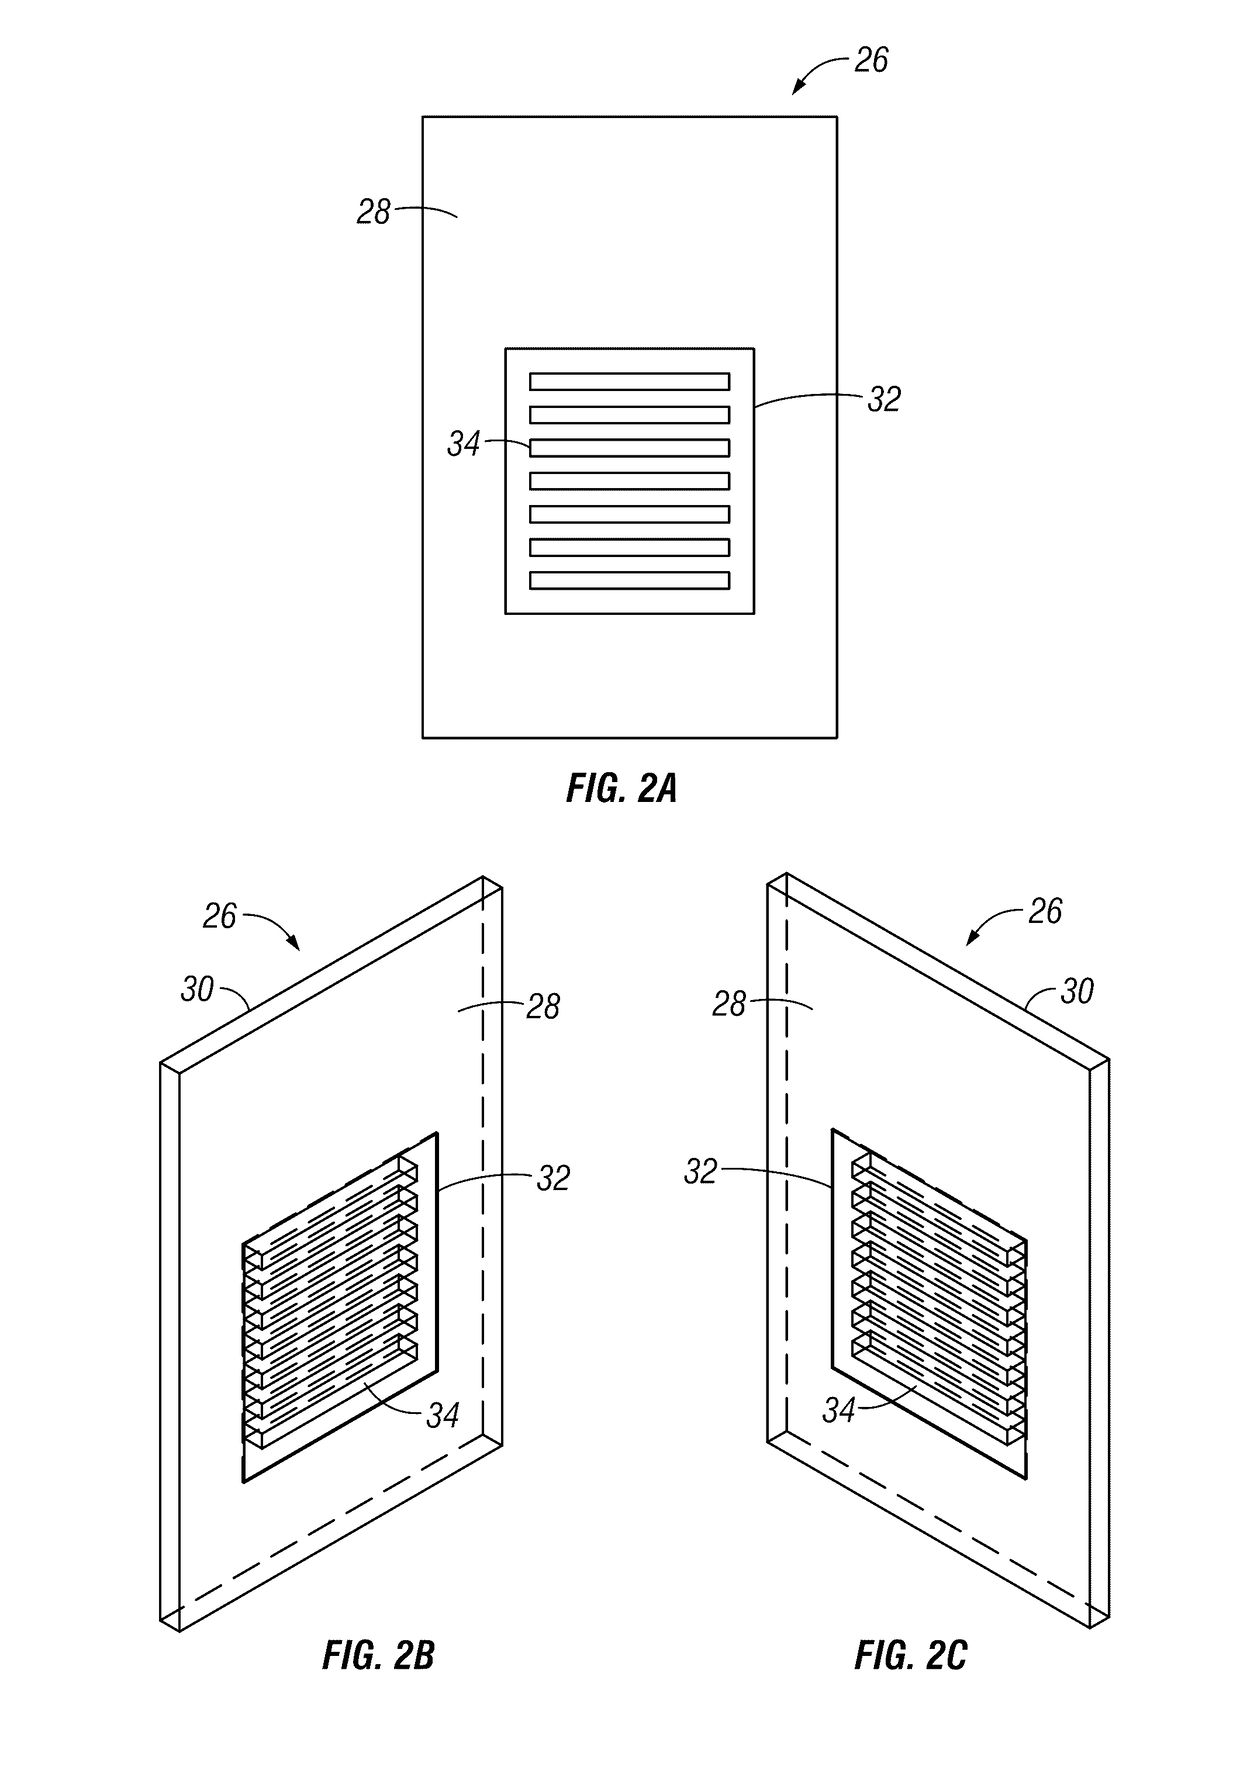 Miniaturized continuous-flow fermenting apparatus, systems, and methods